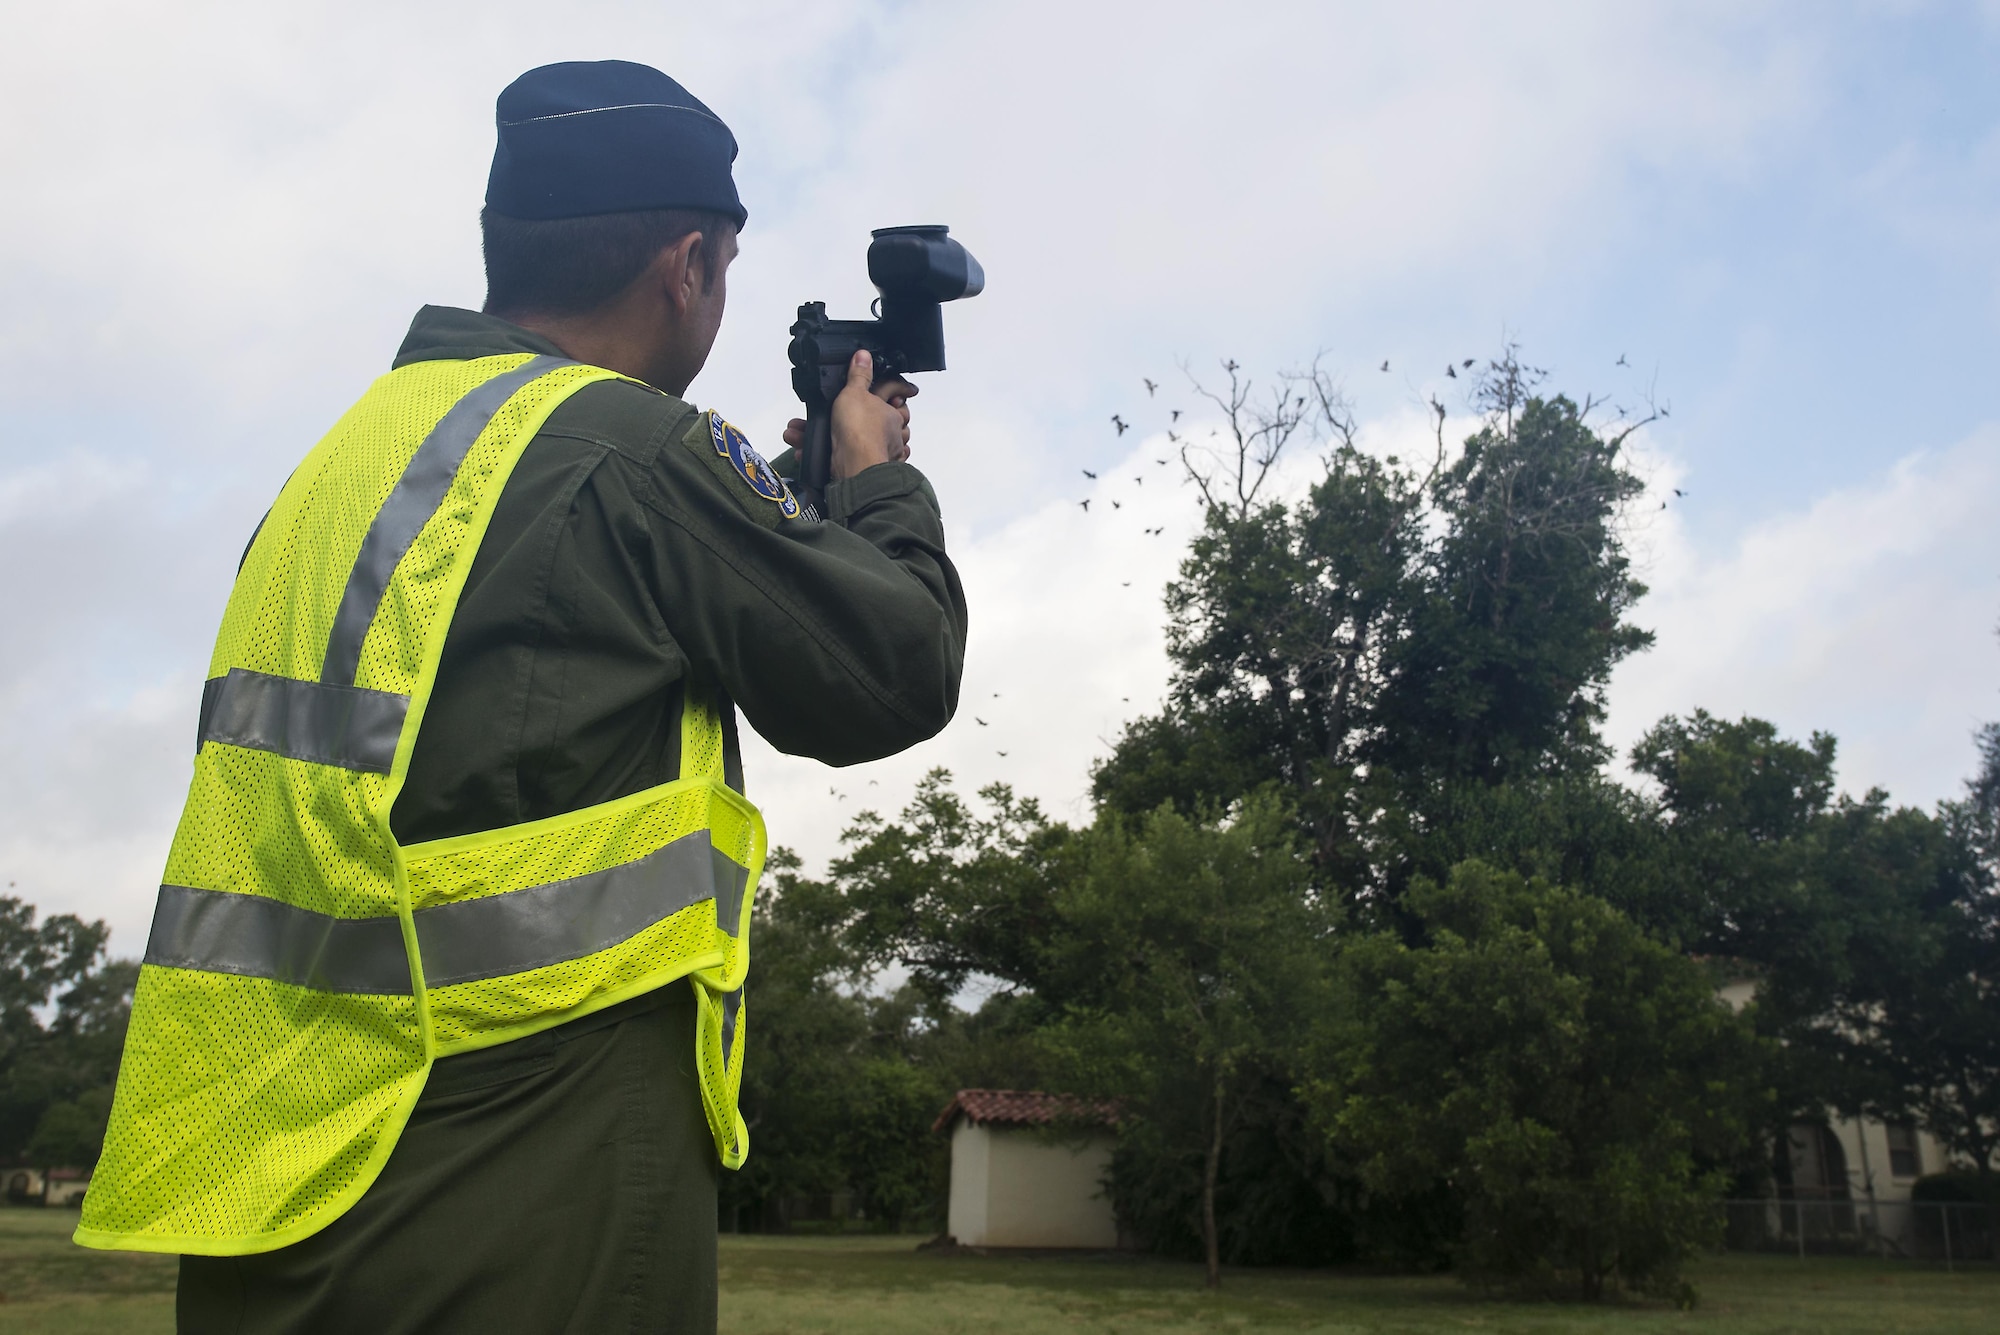 Maj. Will Rose, 12th Flying Training Wing Bird/Wildlife Aircraft Strike Hazard Program manager and T-6A Texan II flight safety officer, fires a paintball gun into a tree full of birds to scare them away July 13, 2016 at Joint Base San Antonio-Randolph. BASH Program team members use bangers, screamers and cracker shells, which are various types of pyrotechnics, to scare birds and wildlife away from where aircraft are taking off and landing.  